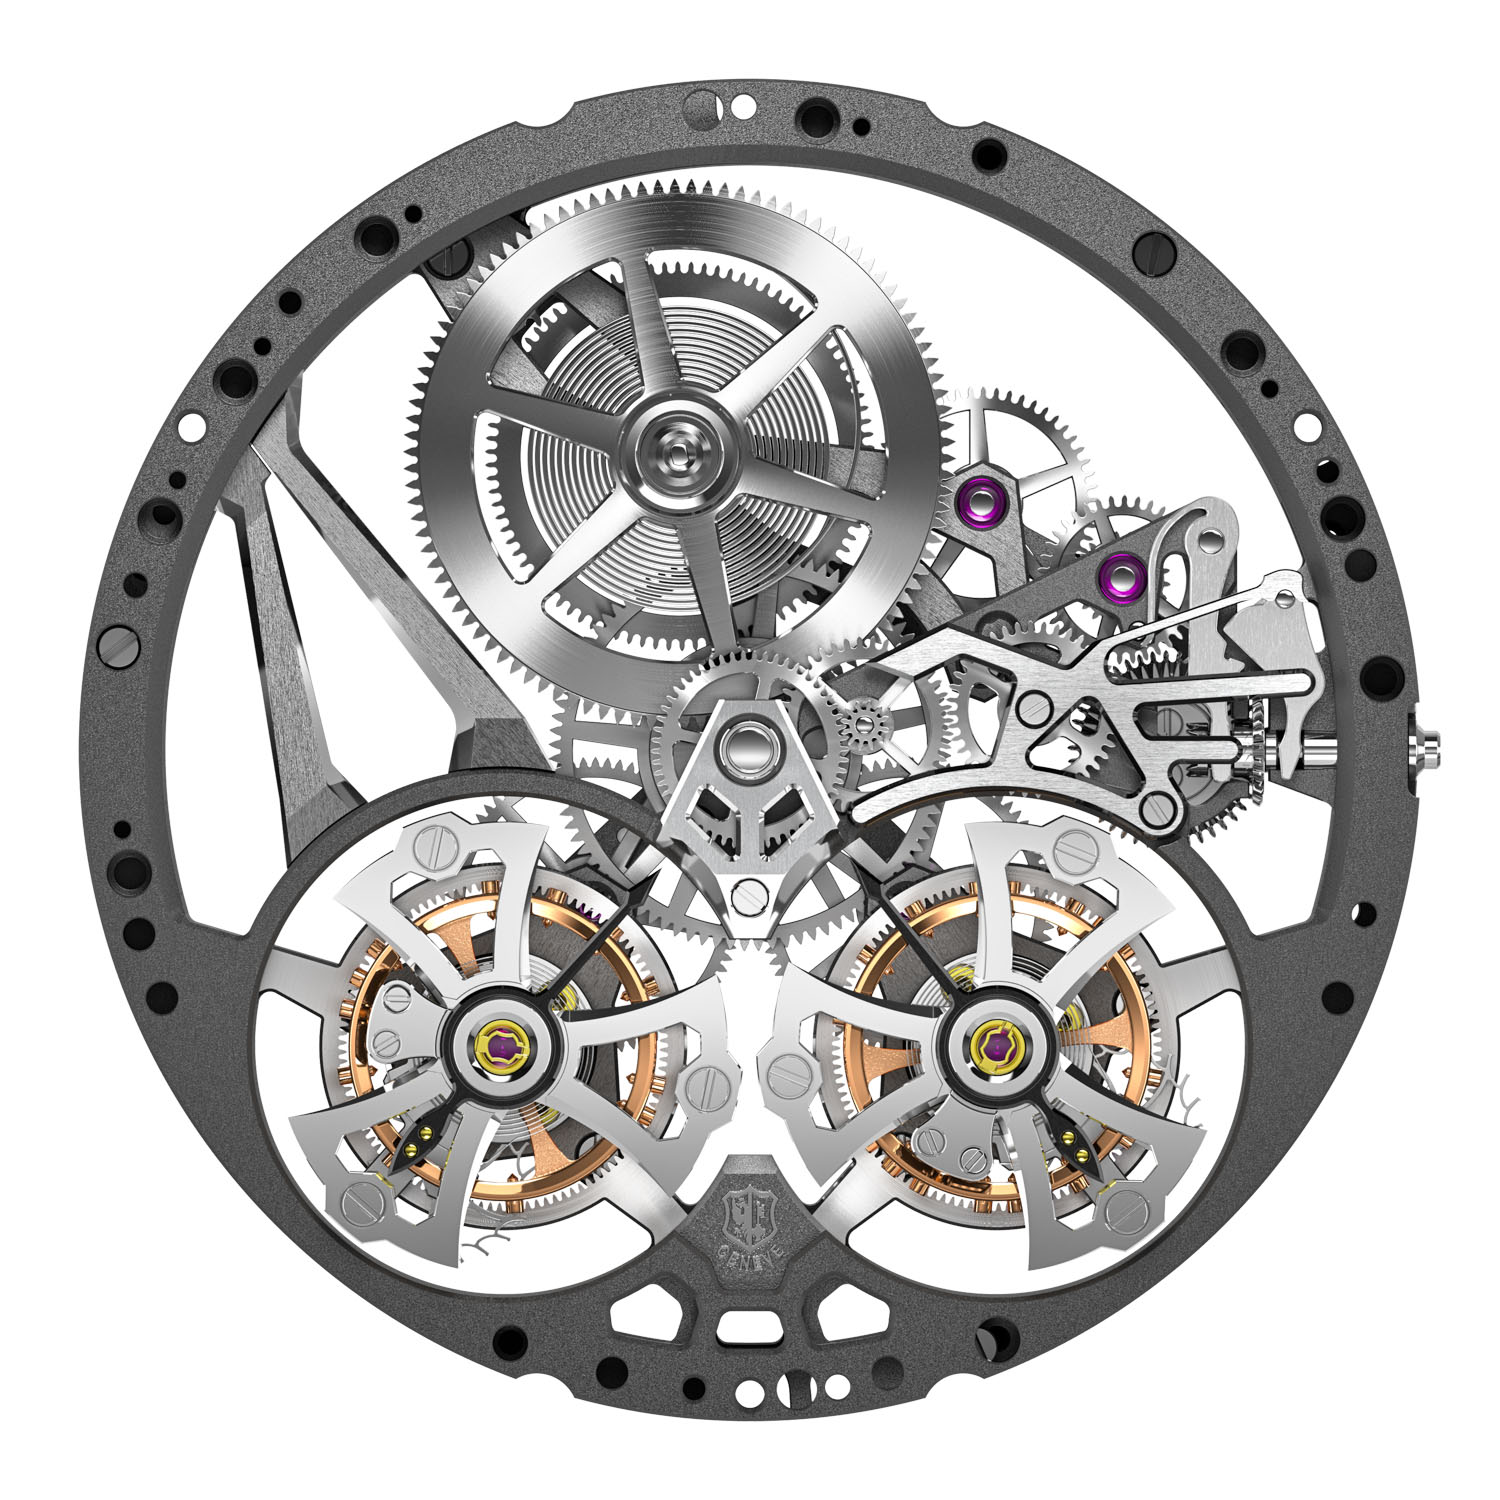 All The 2021 Excalibur Double Flying Tourbillon references are run by the RD108SQ Calibre, which features a lower cage made of titanium (twice as light as stainless steel) and an upper one in mirror-polished cobalt chrome